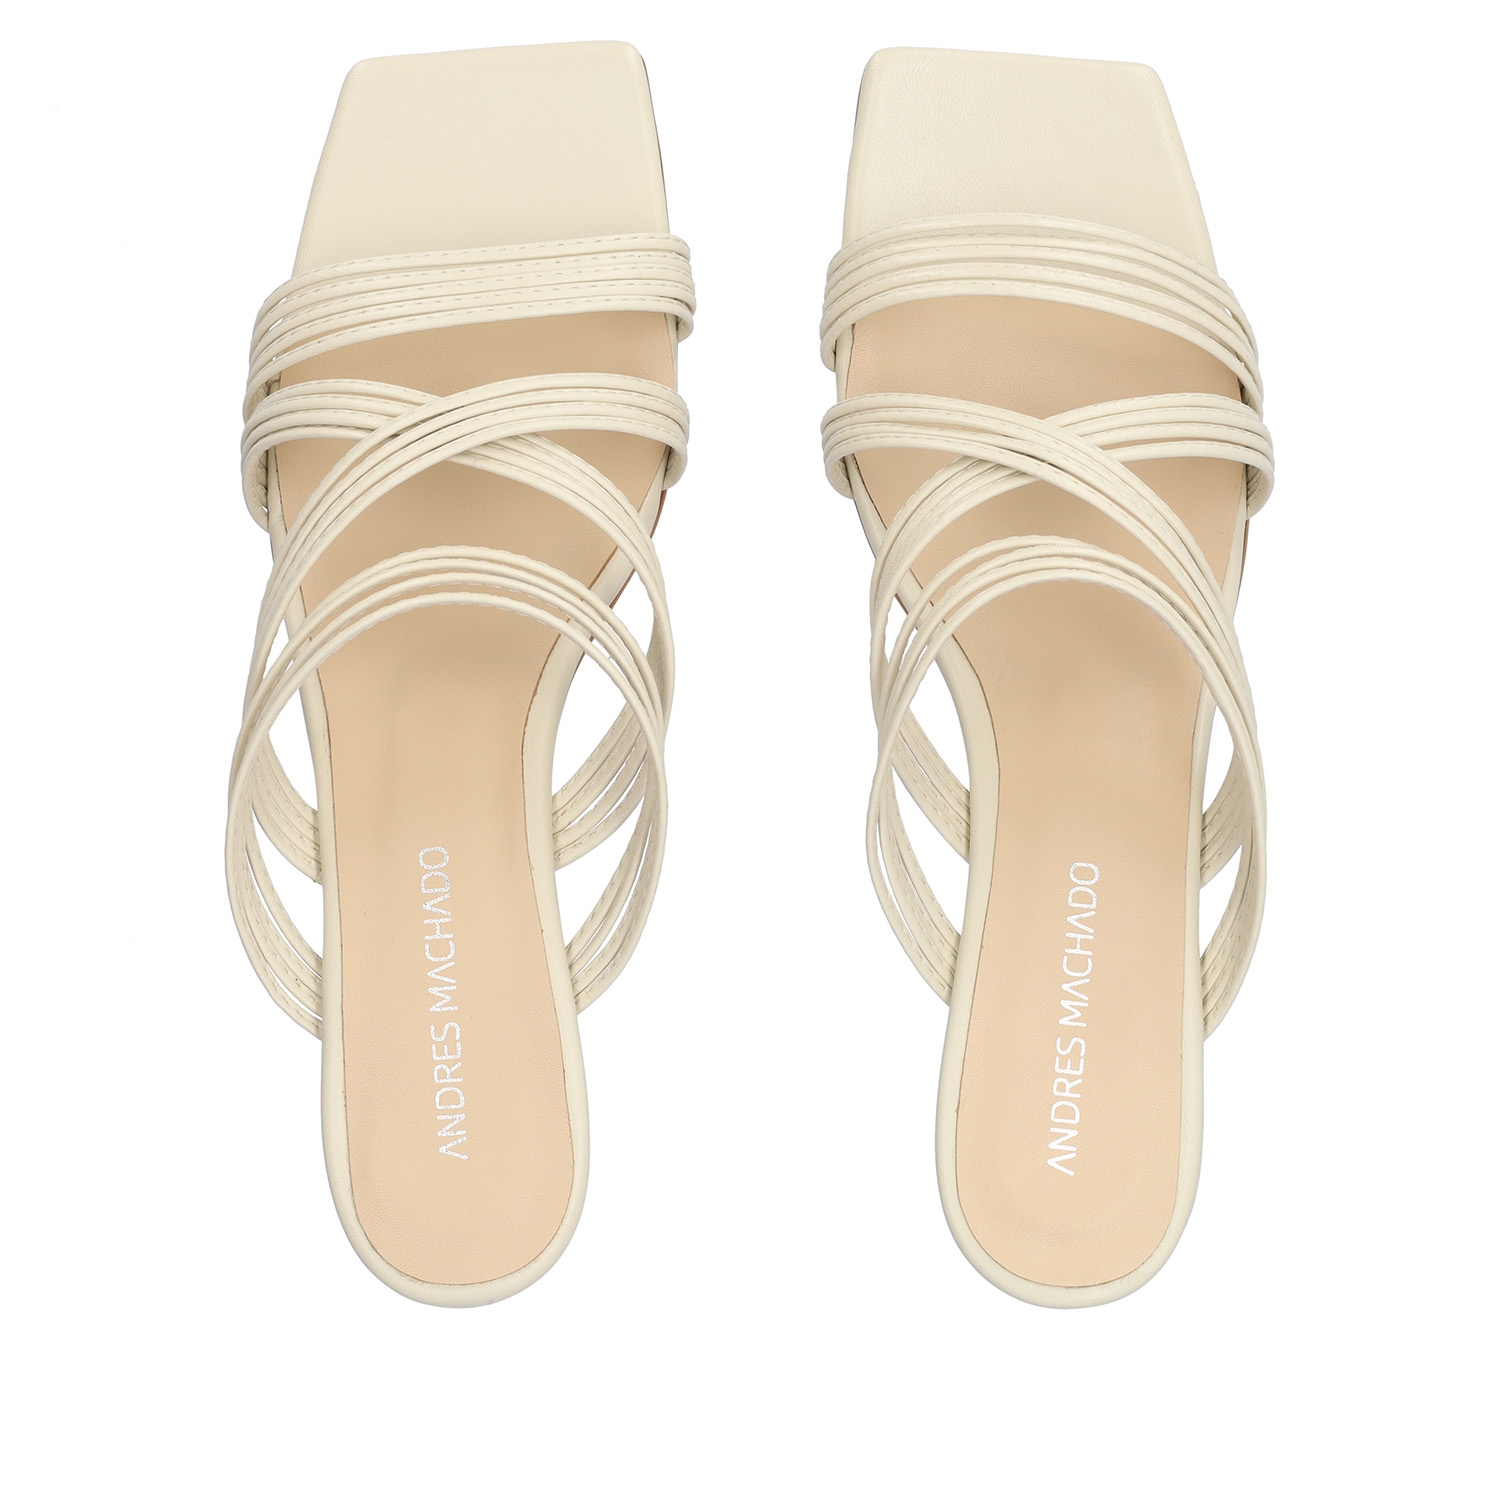 Off-white leather heeled sandals 